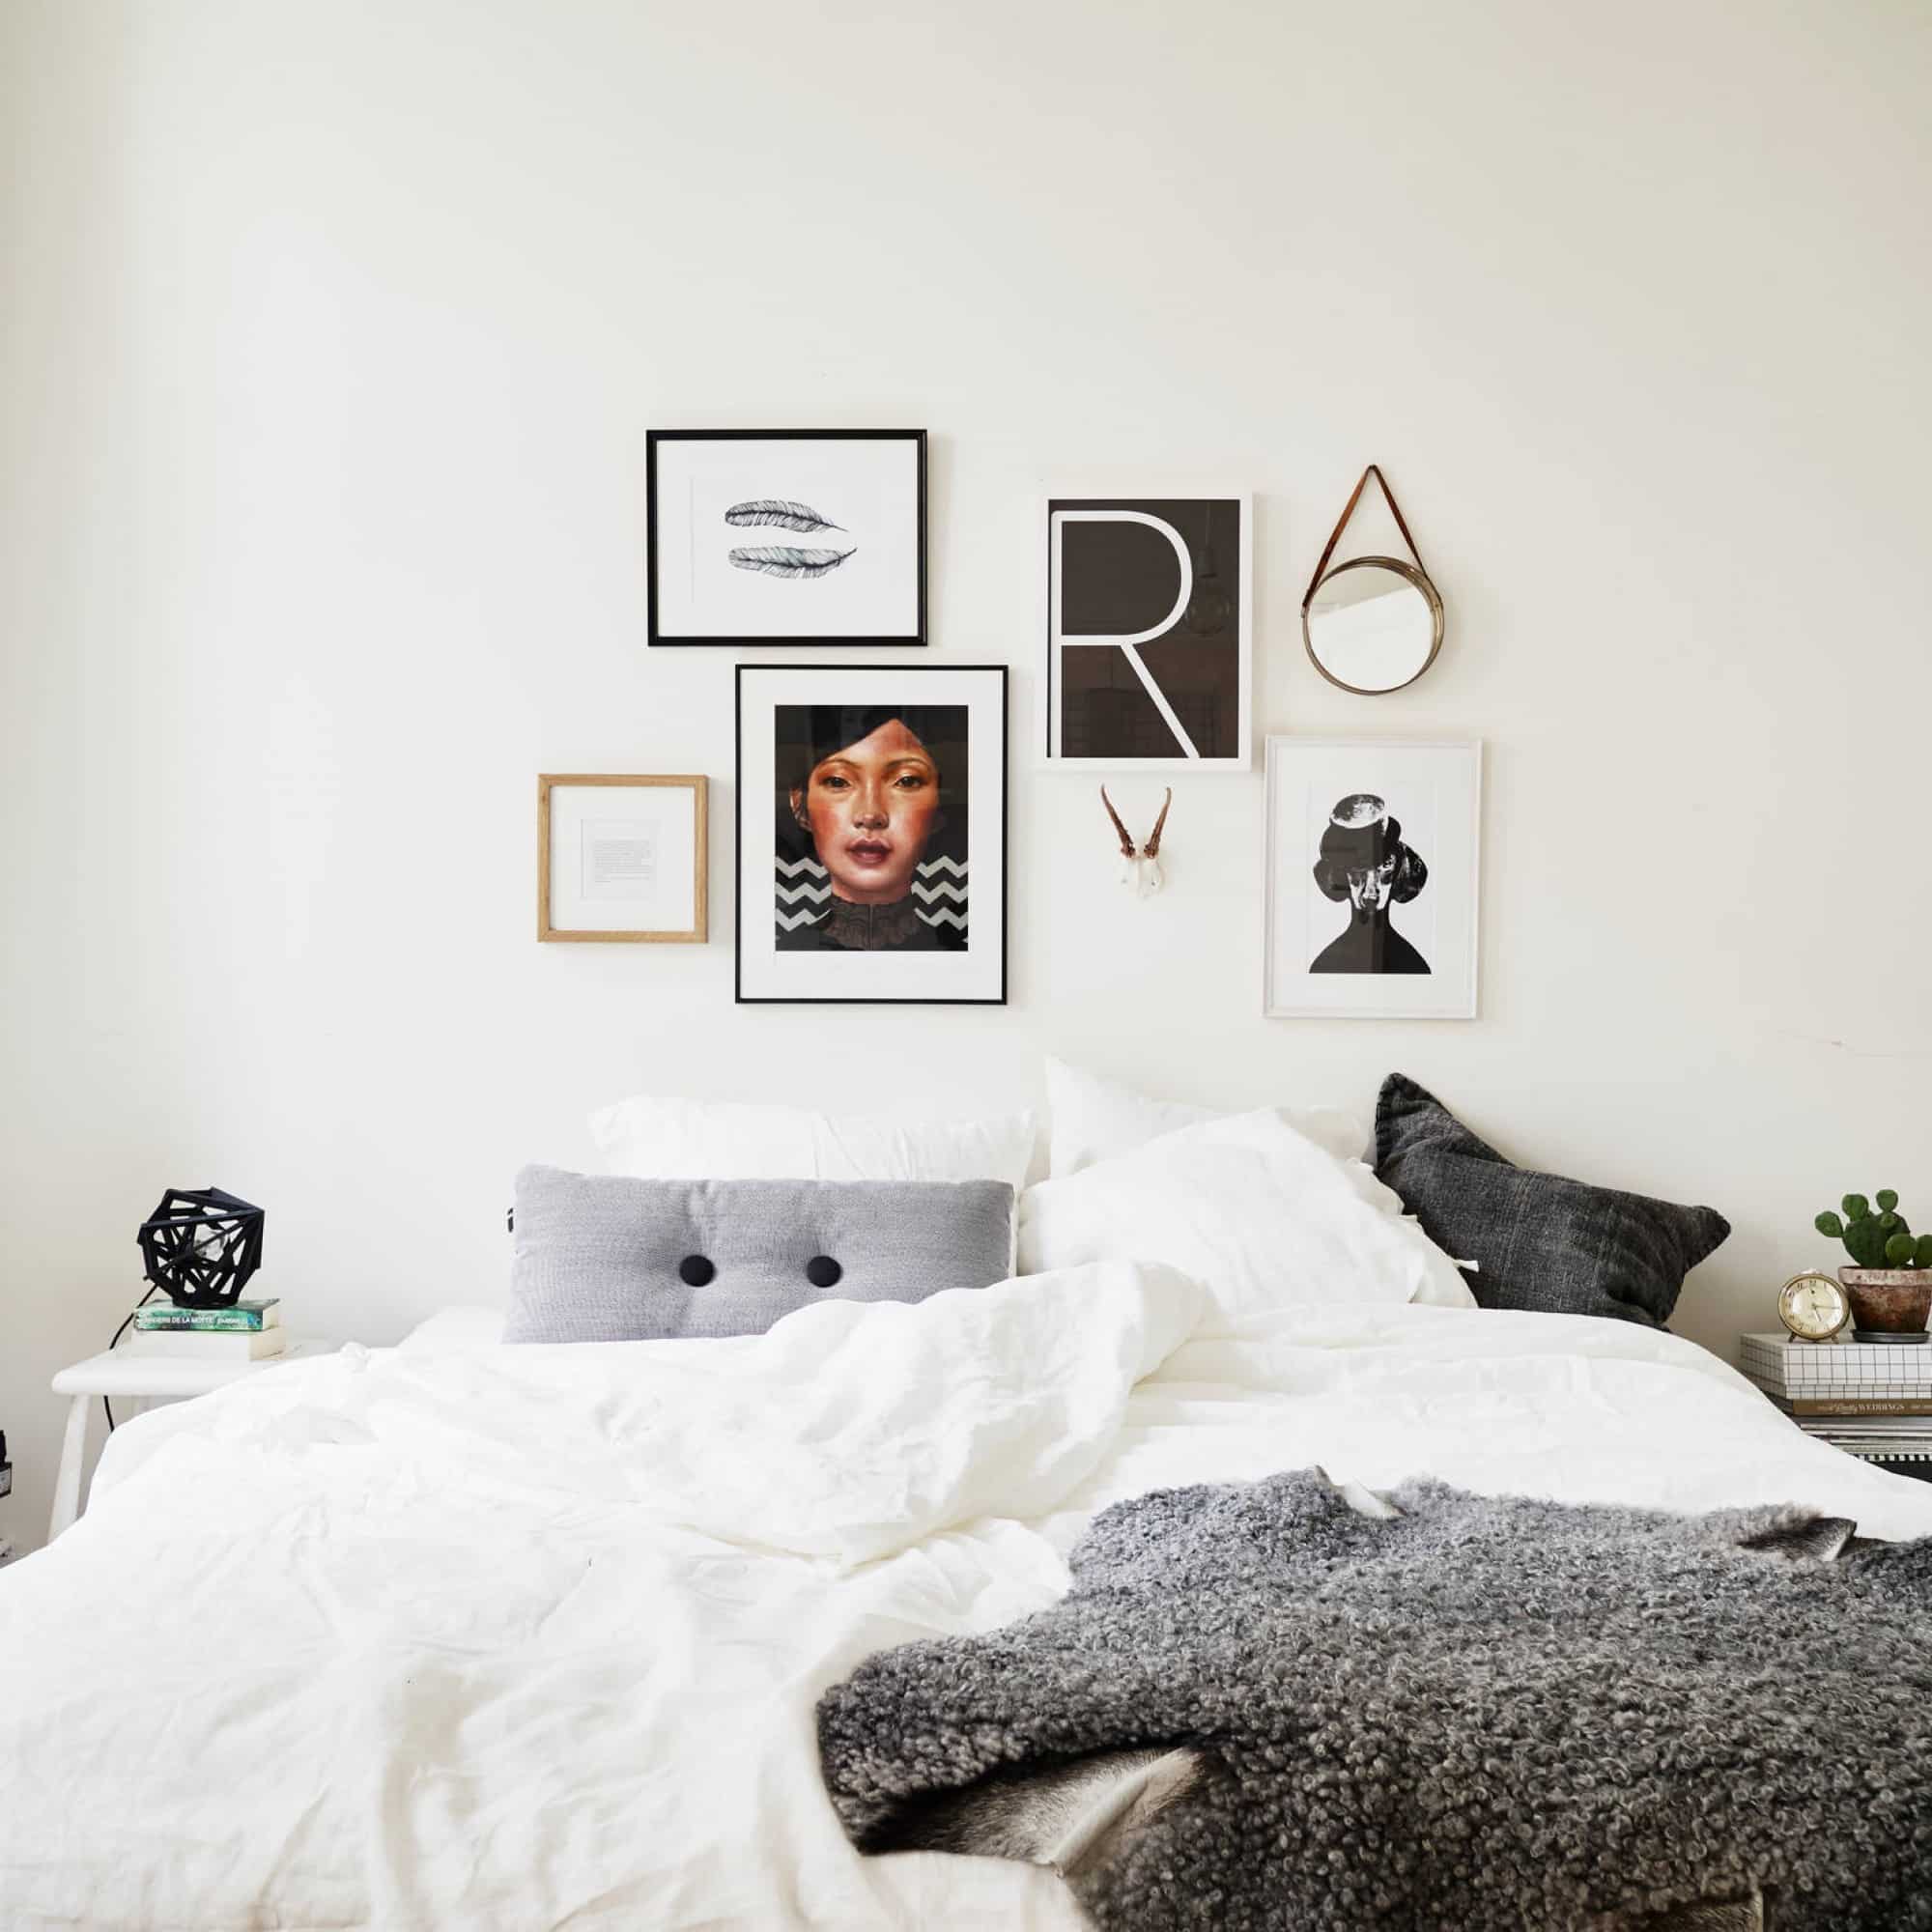 11 THINGS FOR SMART SMALL BEDROOM DESIGN - COCOCOZY